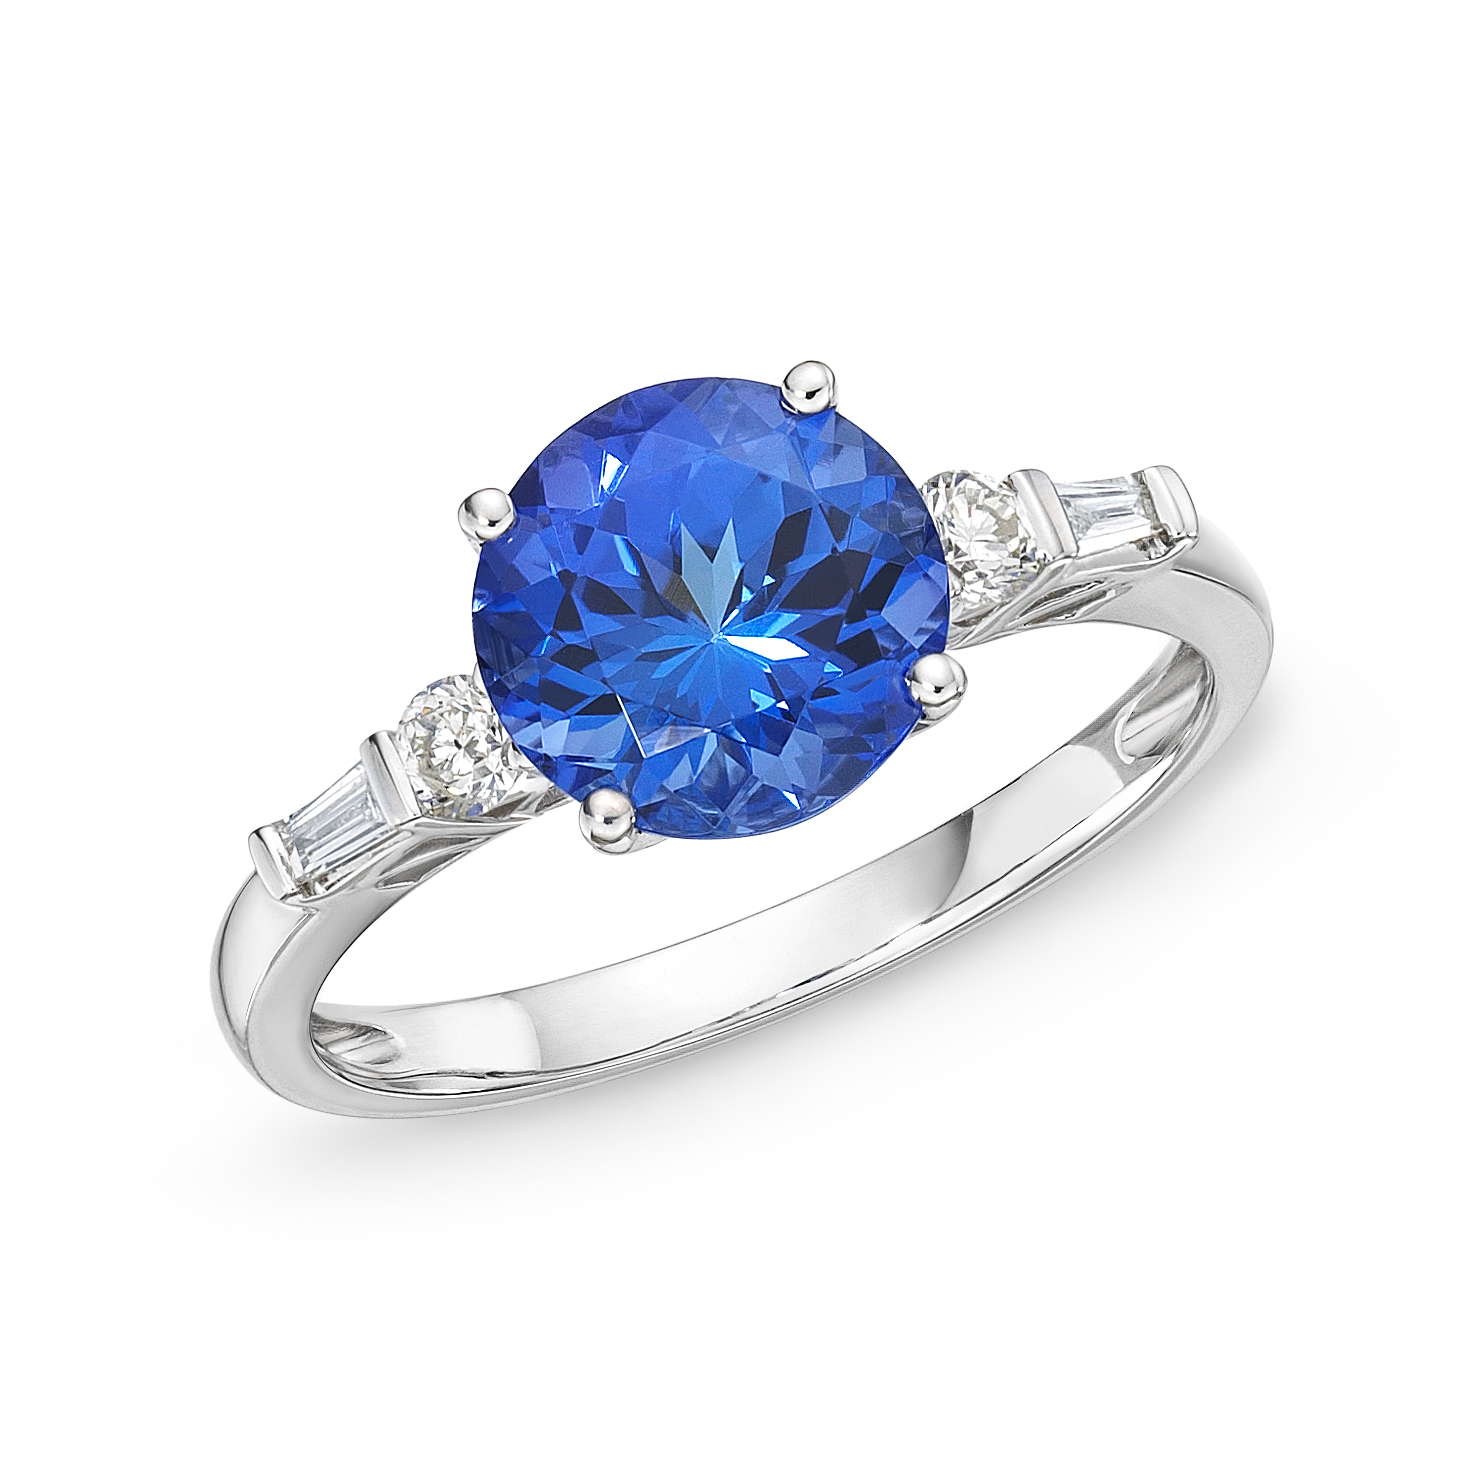 Tanzanite Rings – The Ultimate Choice Of Native Americans - StyleSkier.com